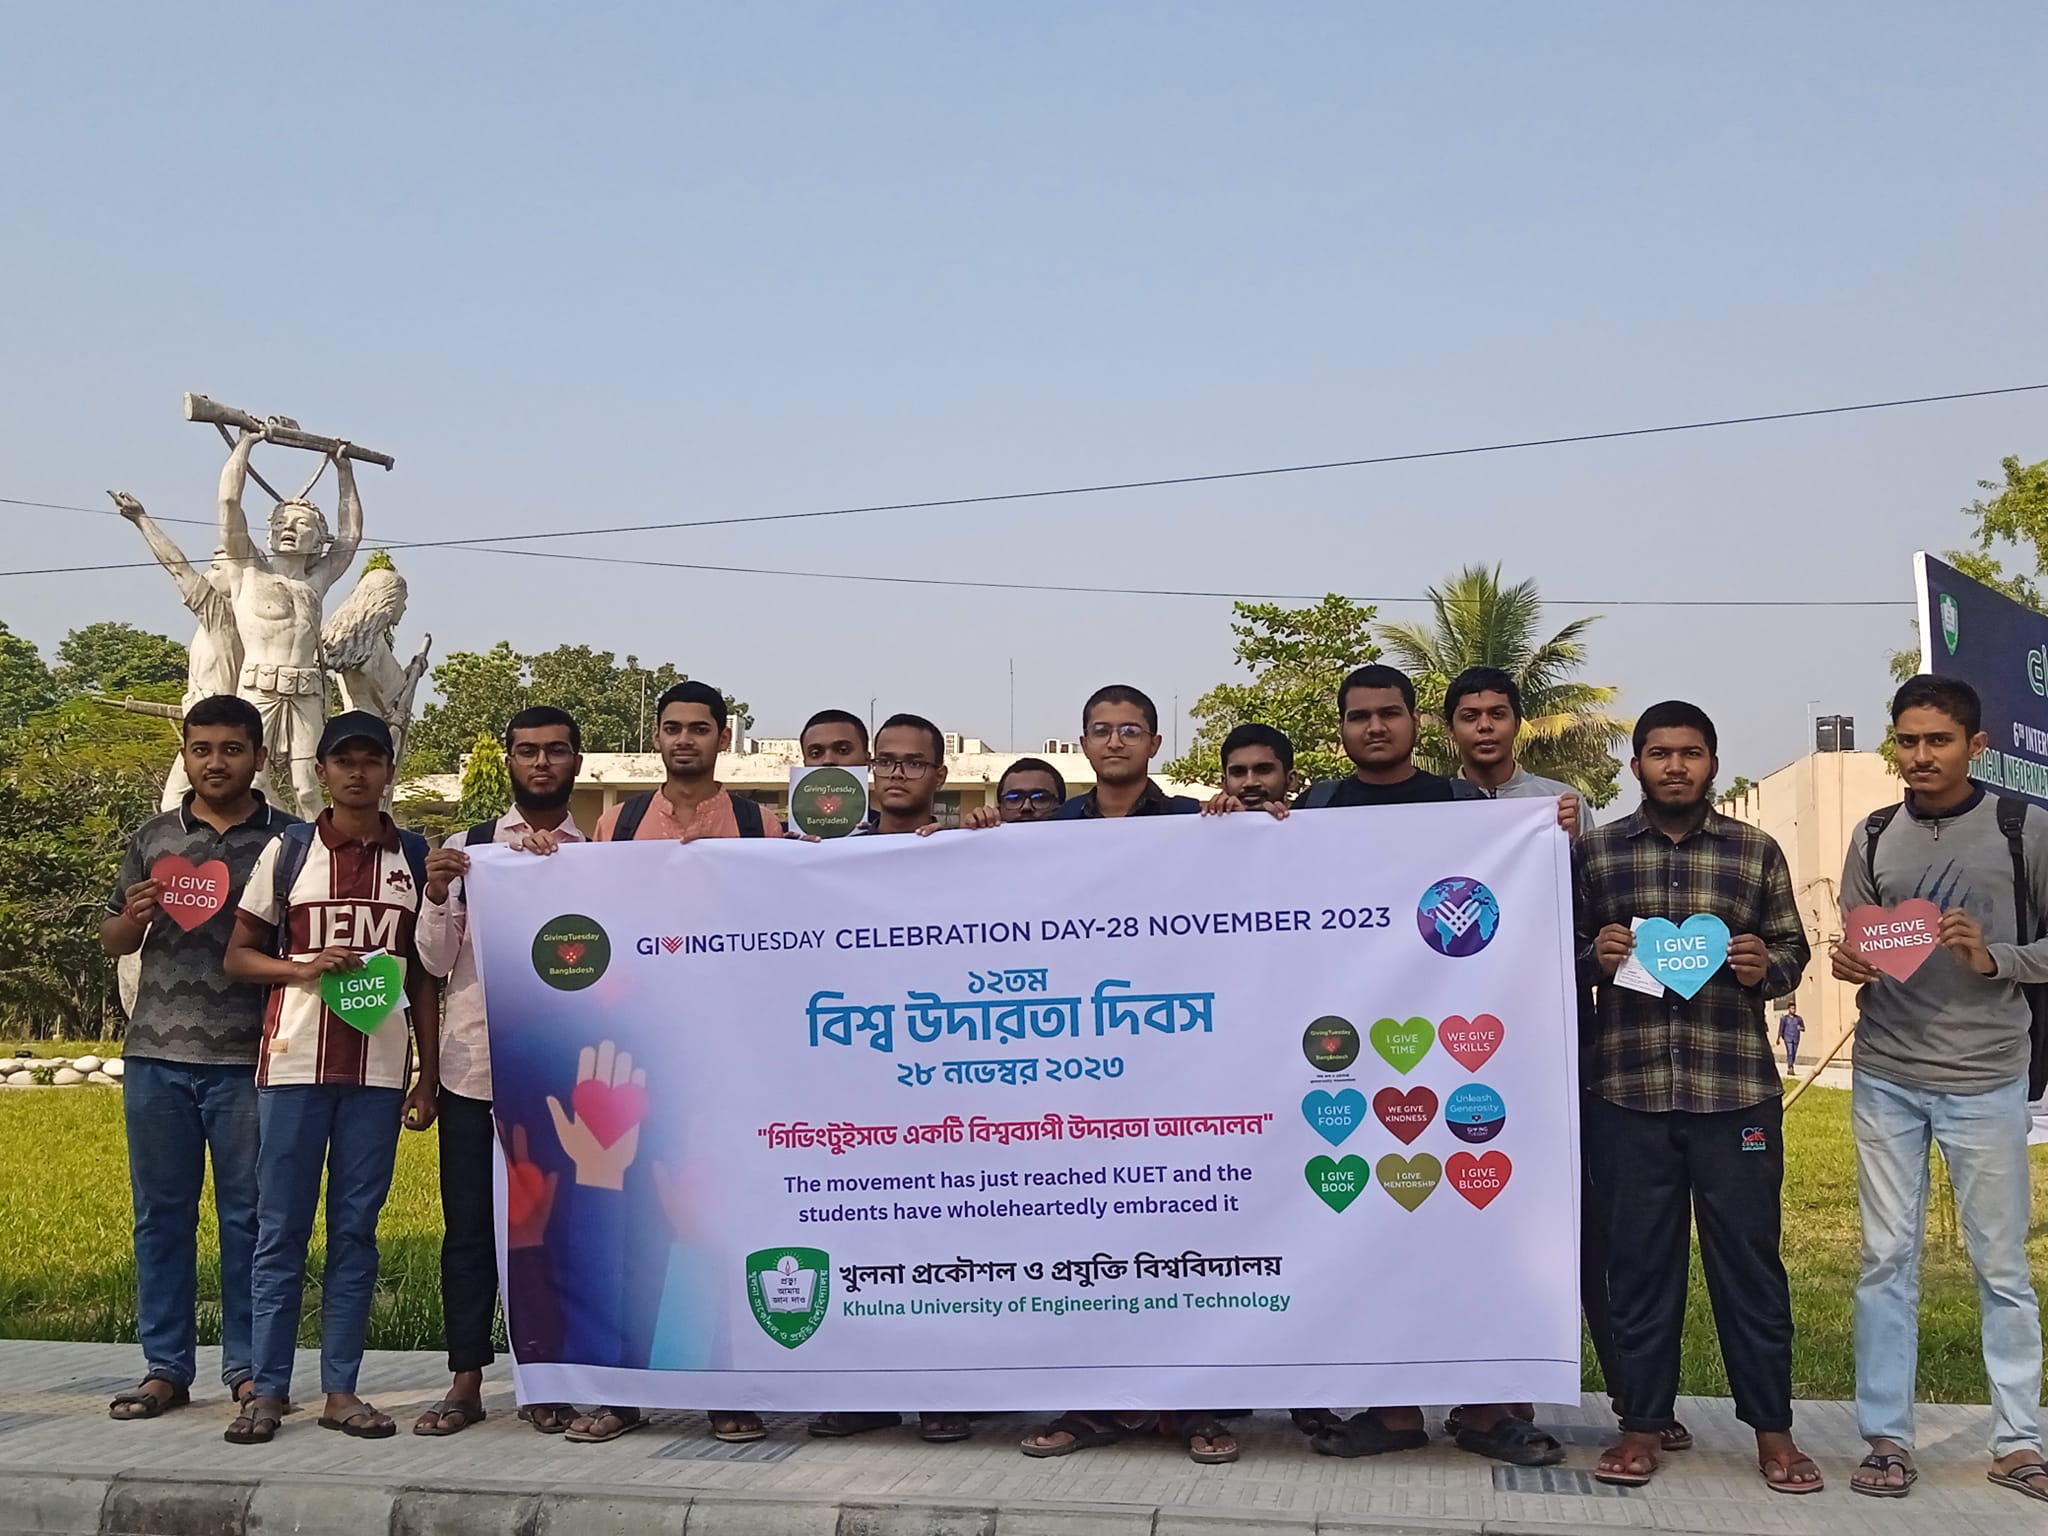 Students of the Khulna University of Engineering & Technology #KUET  celebrate the GivingTuesday 2023